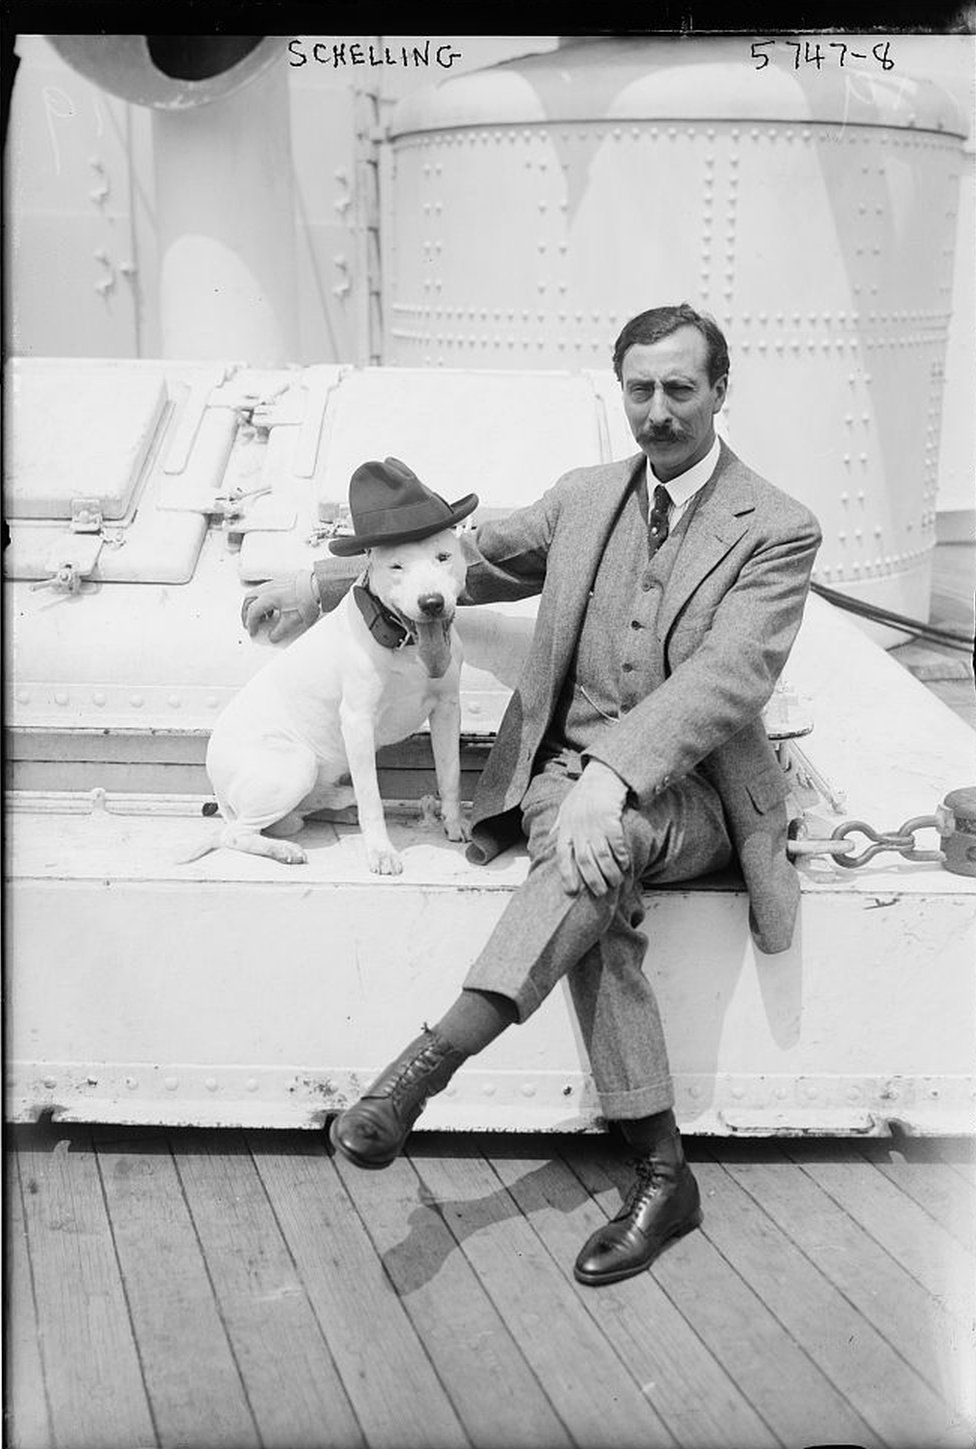 Ernest Schelling US pianist, composer & conductor at on board dog show